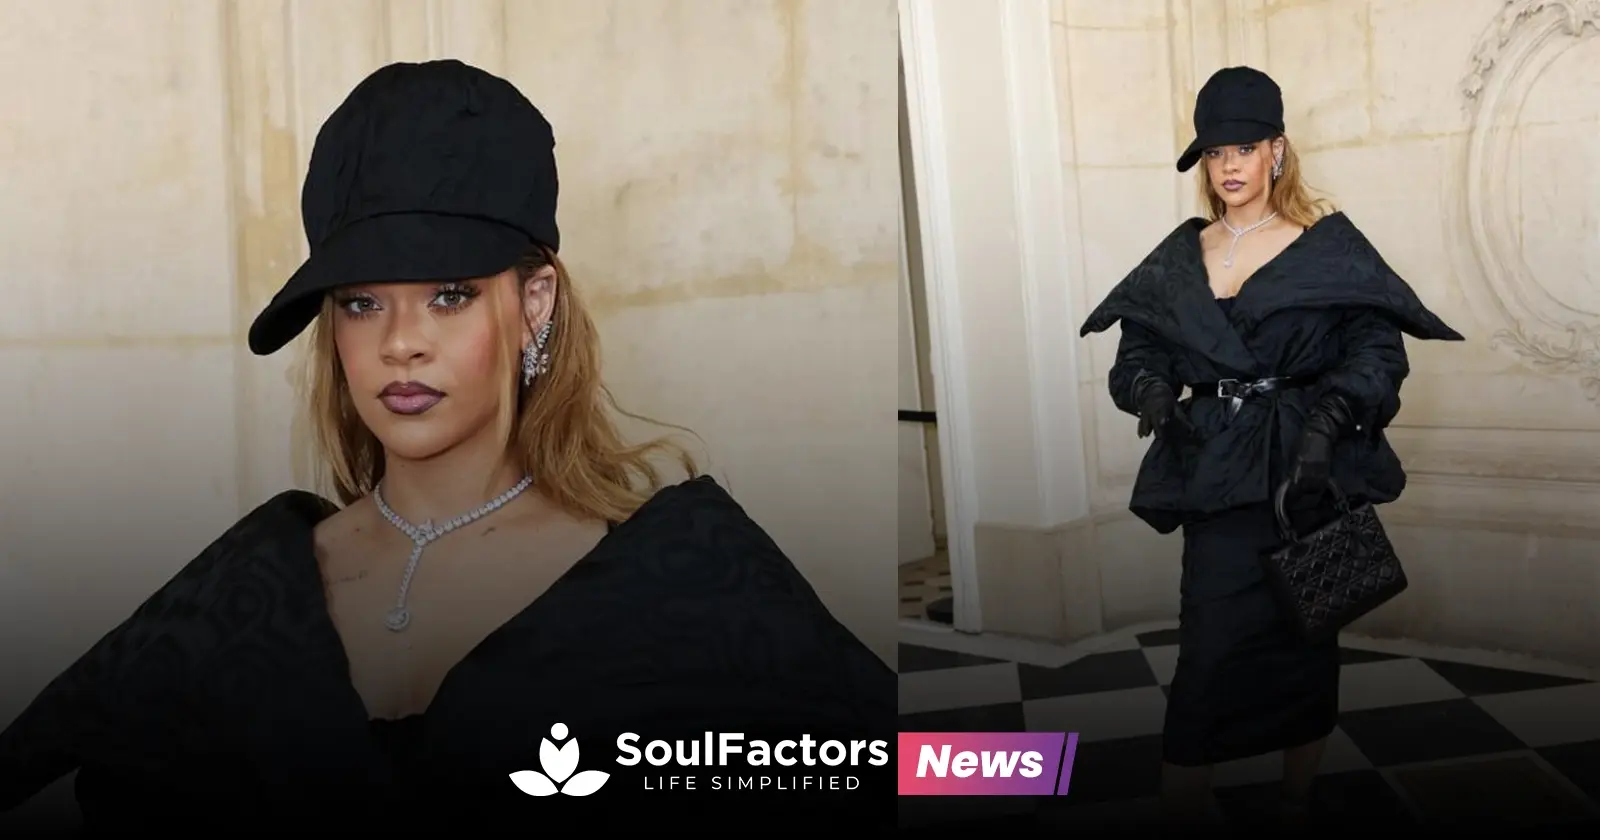 Rihanna Put a Tomboy Twist on a Black Belted Dress, Jacket, and Diamonds at Dior's Haute Couture Show